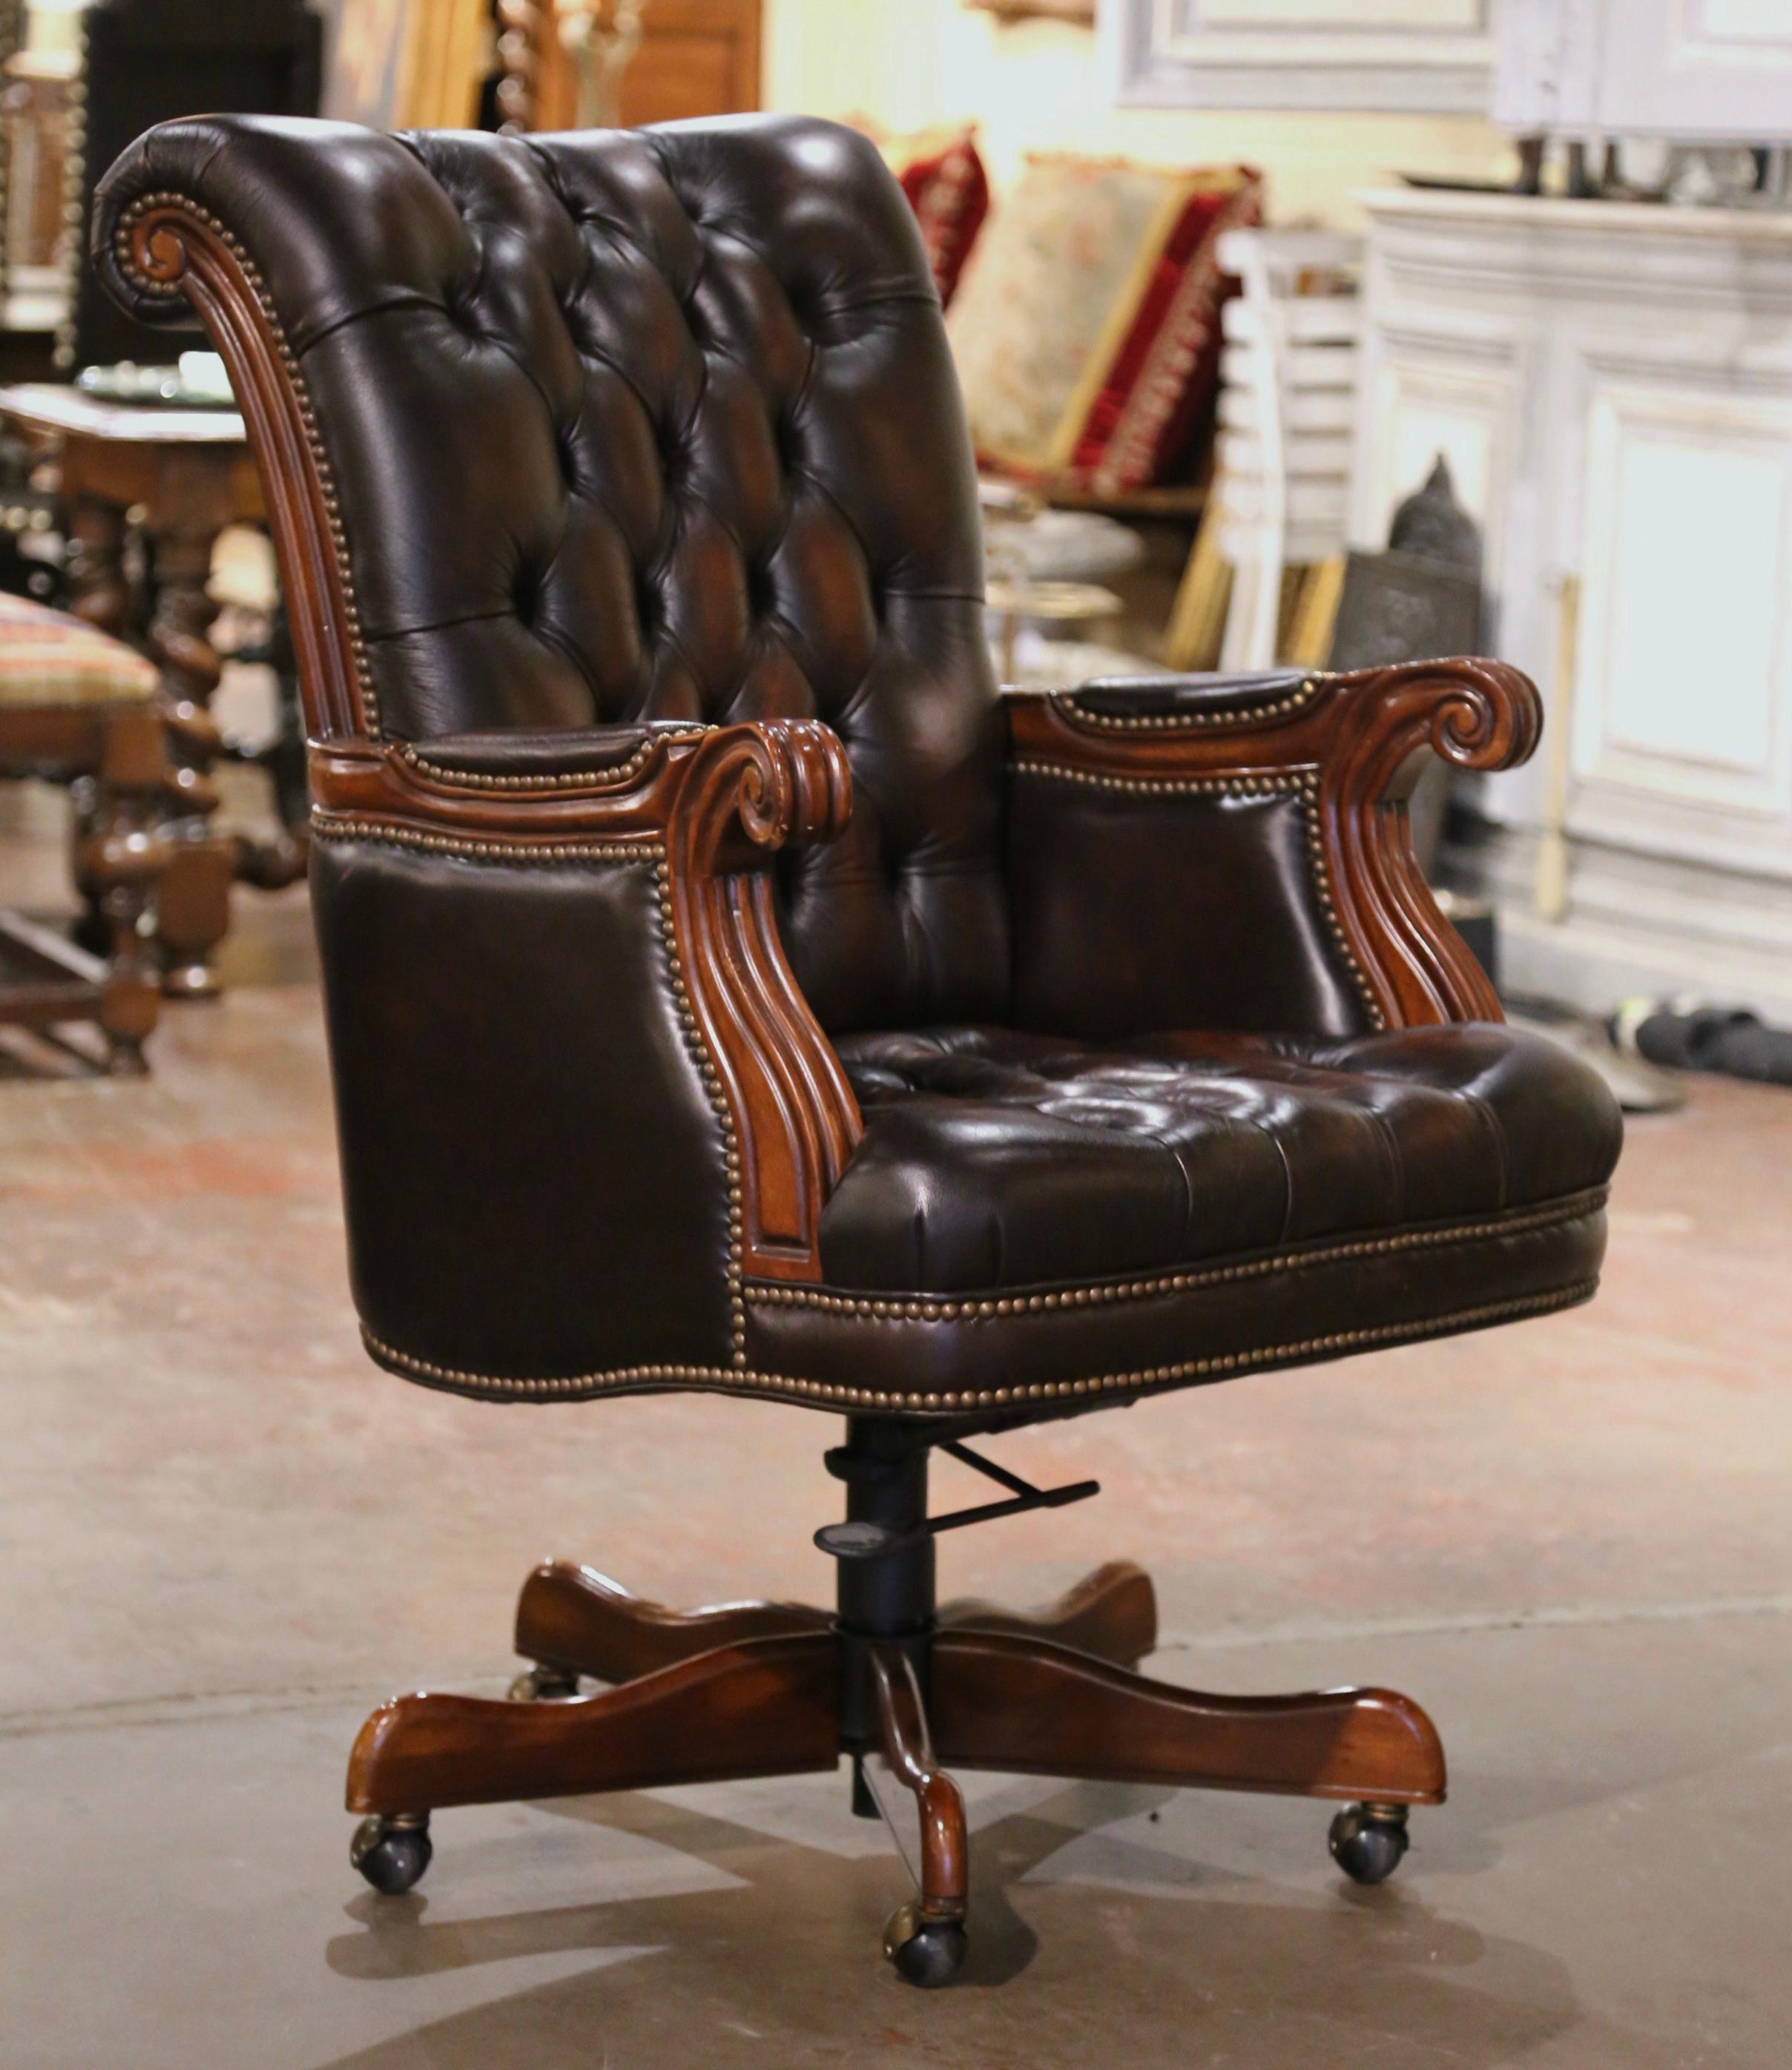 20th Century Vintage Adjustable and Swivel Executive Office Desk Armchair with Tufted Leather